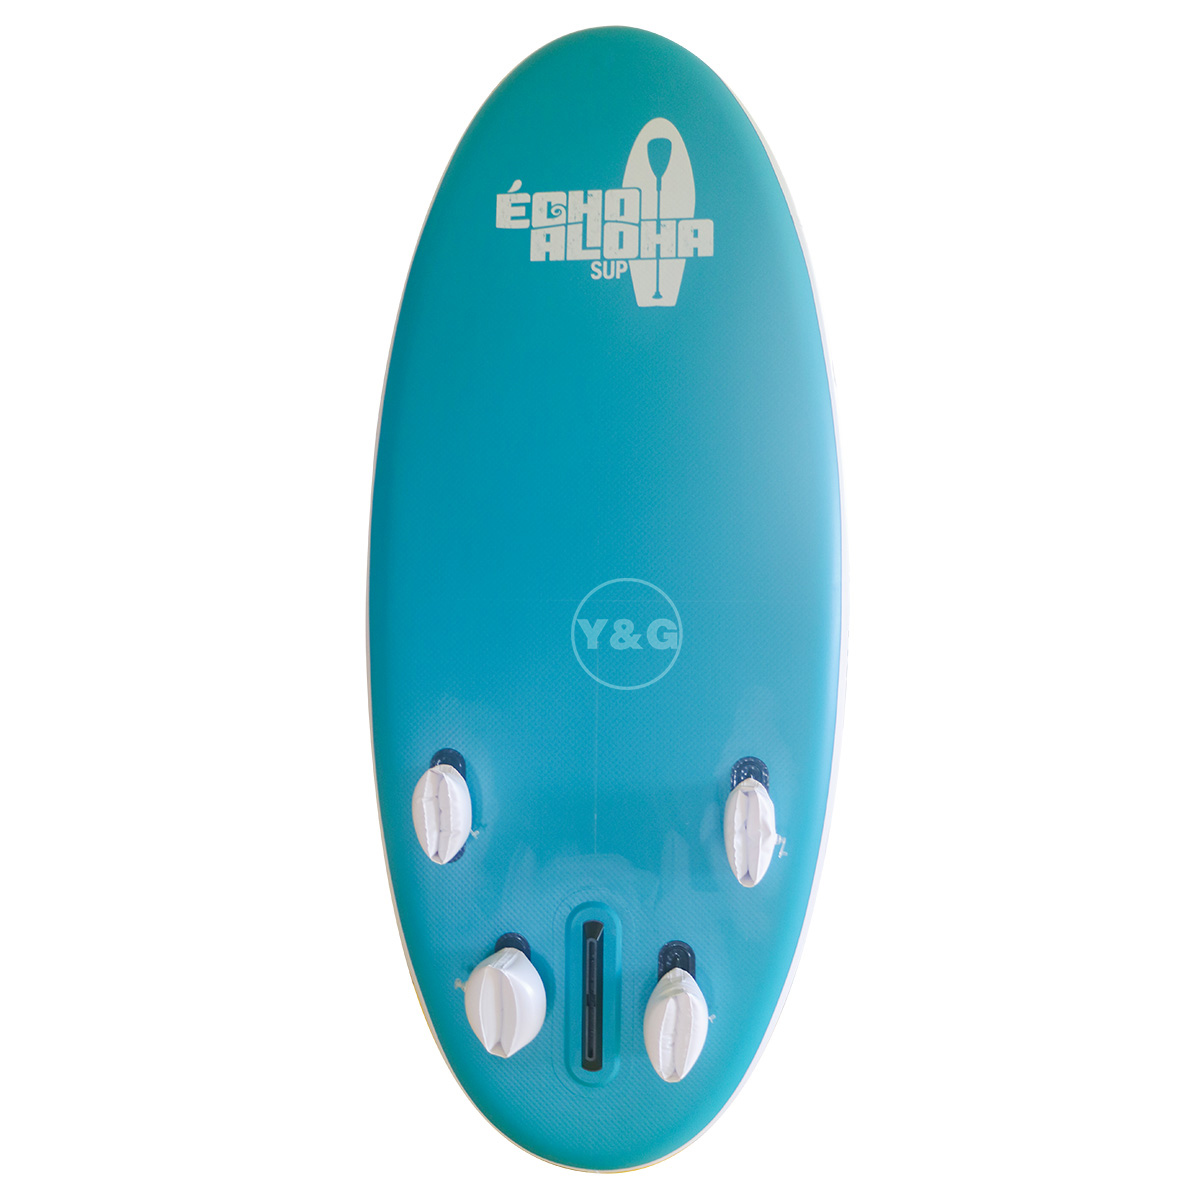 Large Inflatable Paddle BoardYPD-70